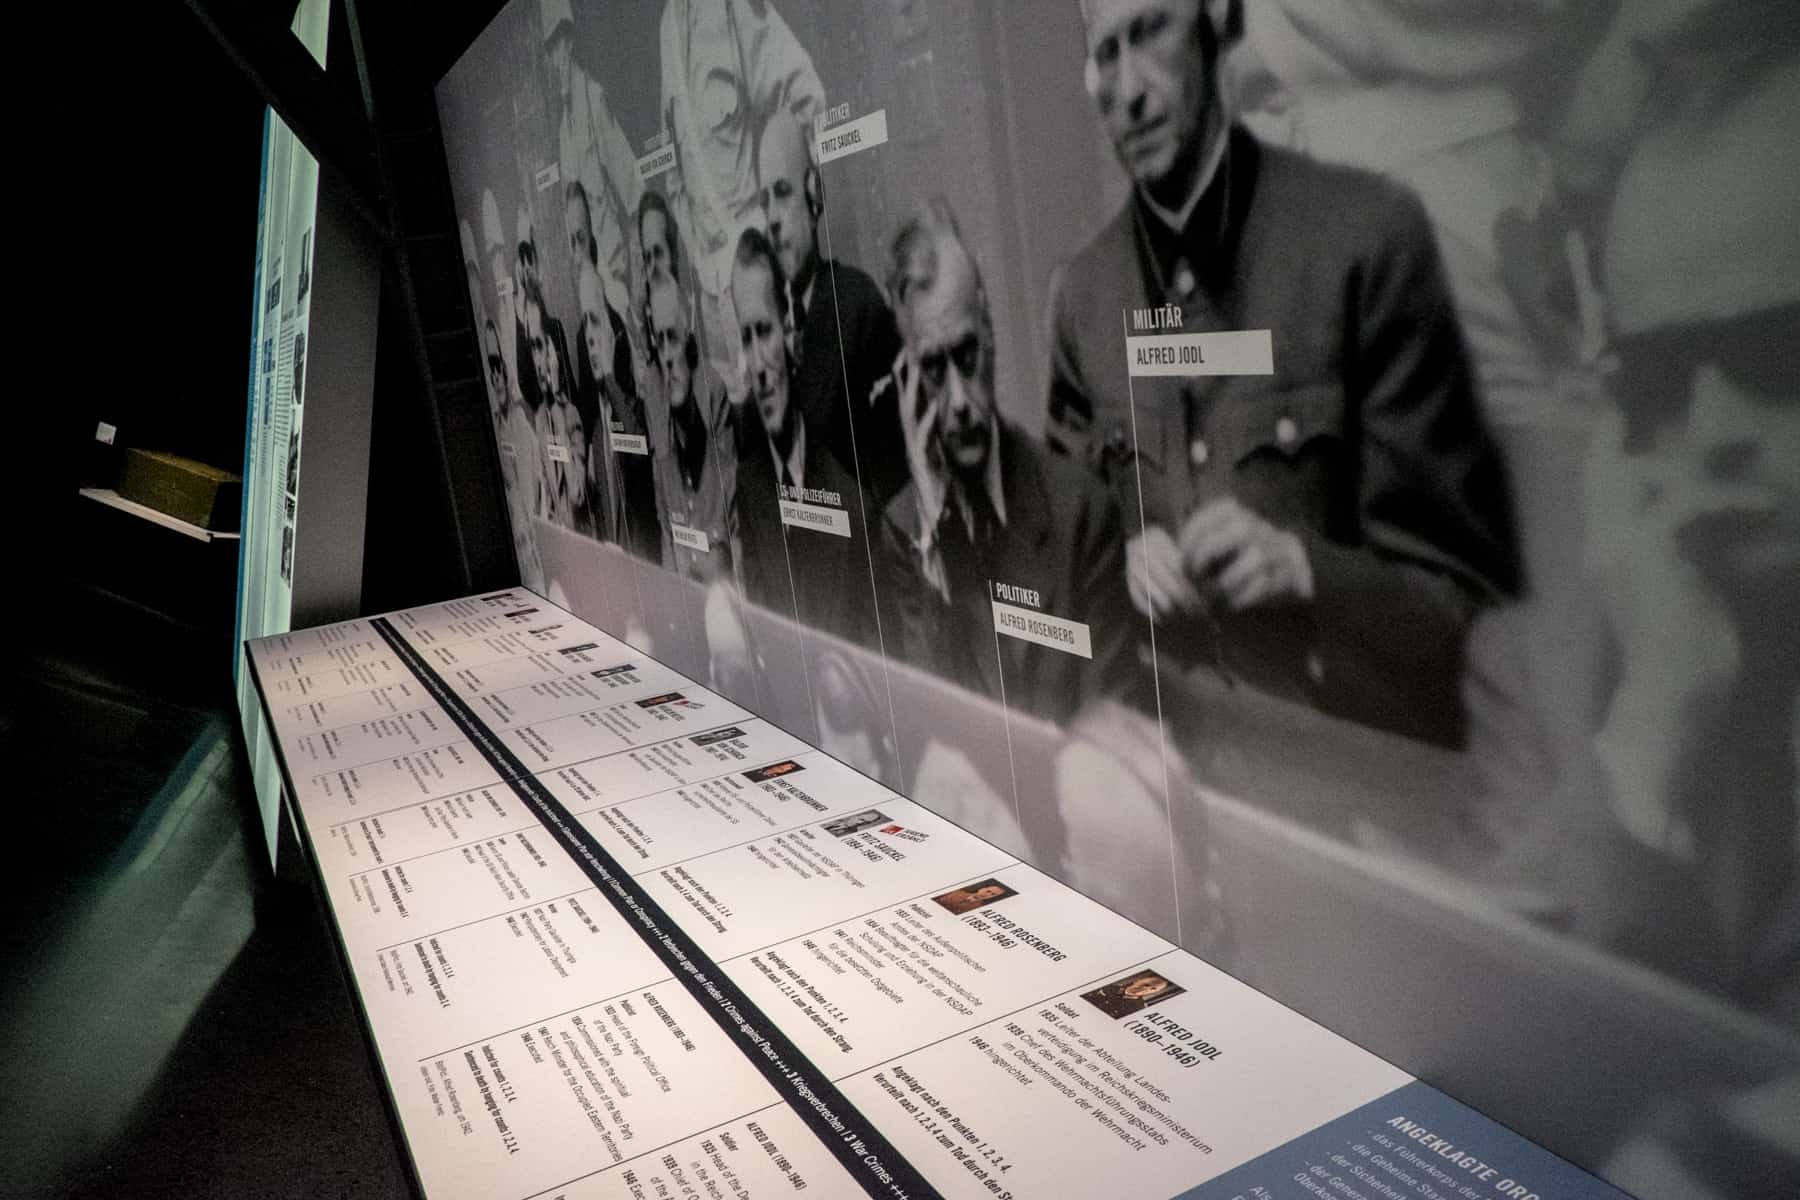 One of the displays showing what Nazis were on trial at the Memorium Nuremberg Trials Exhibition